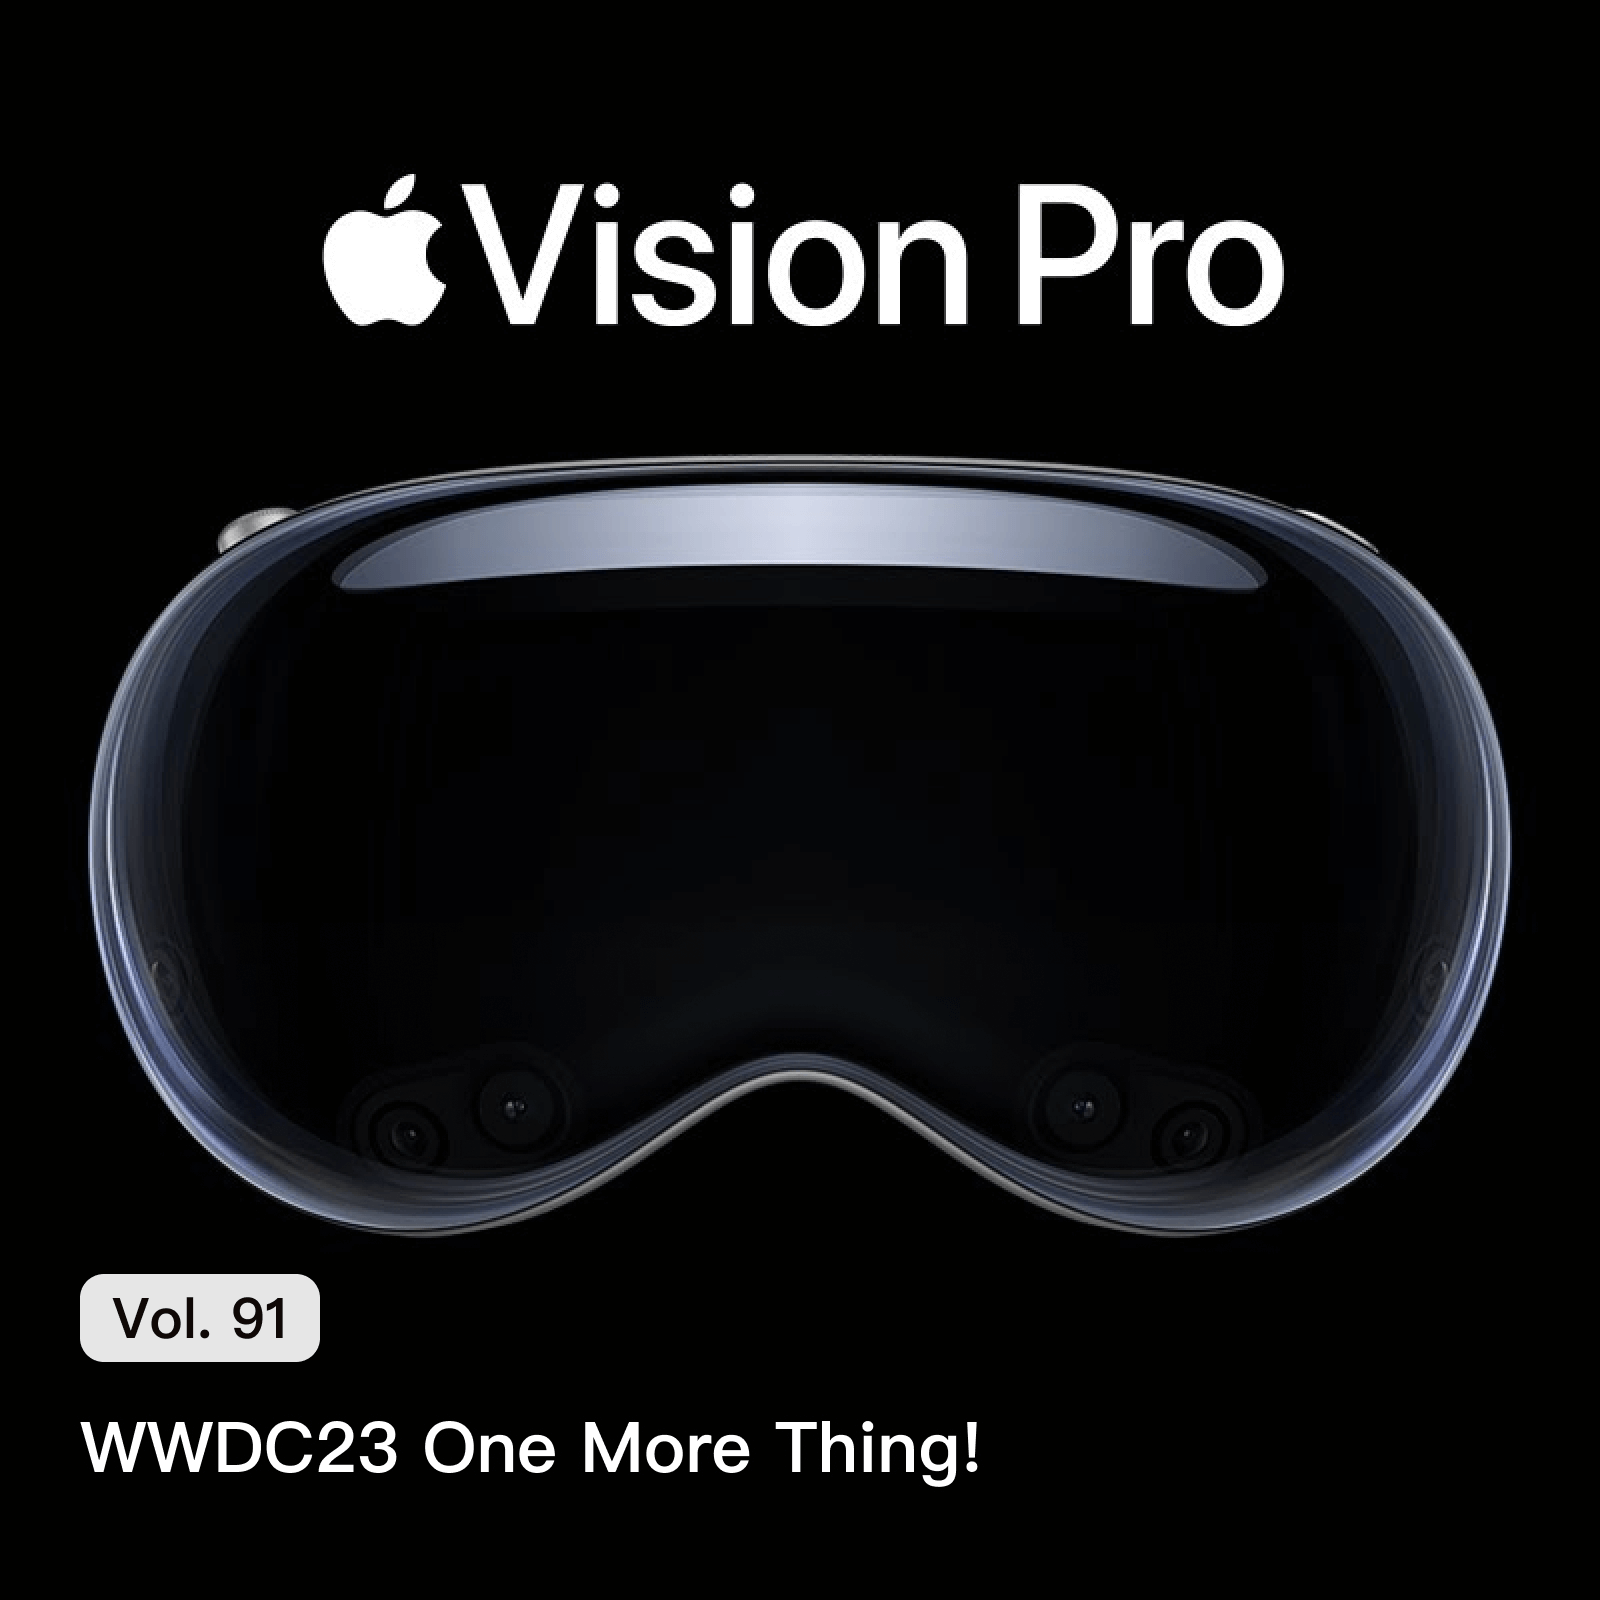 Vol. 91 WWDC23 – One More Thing!